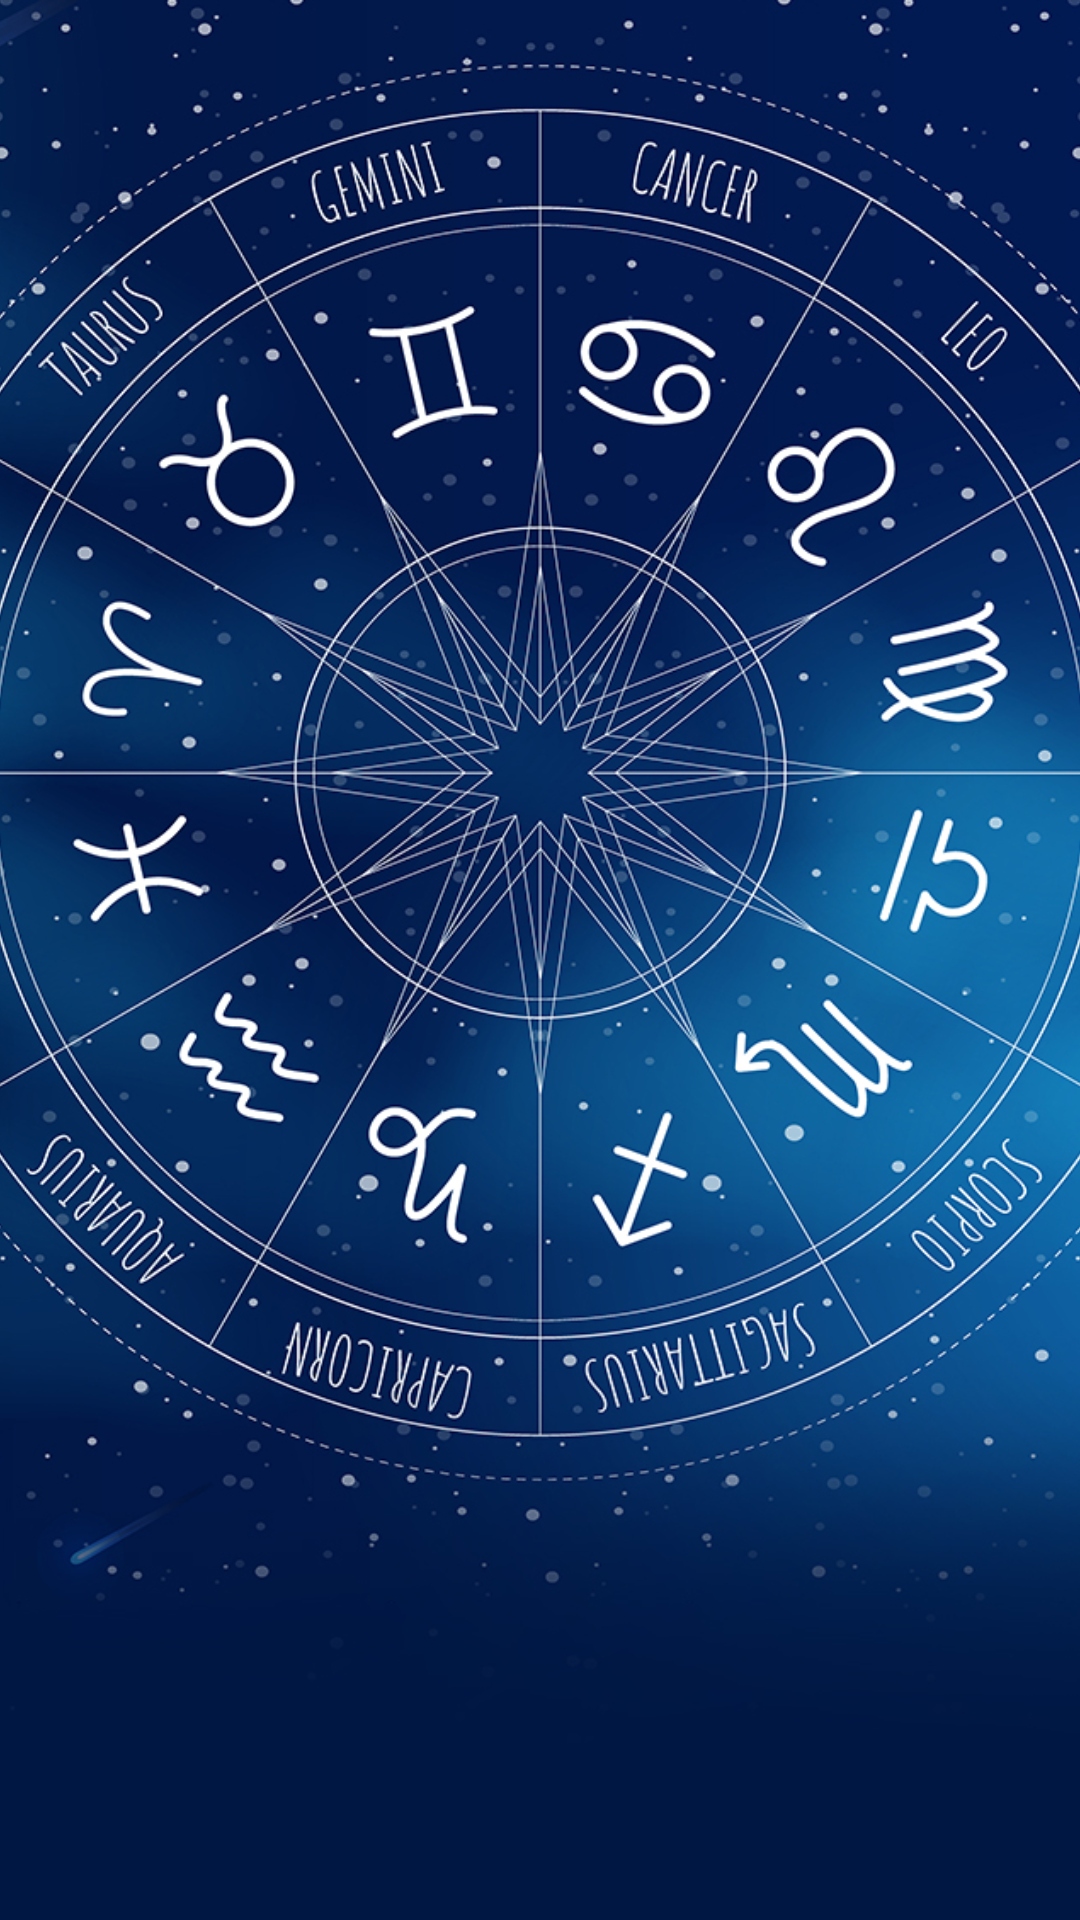 Know lucky number and colour for all zodiac signs in your horoscope for ...